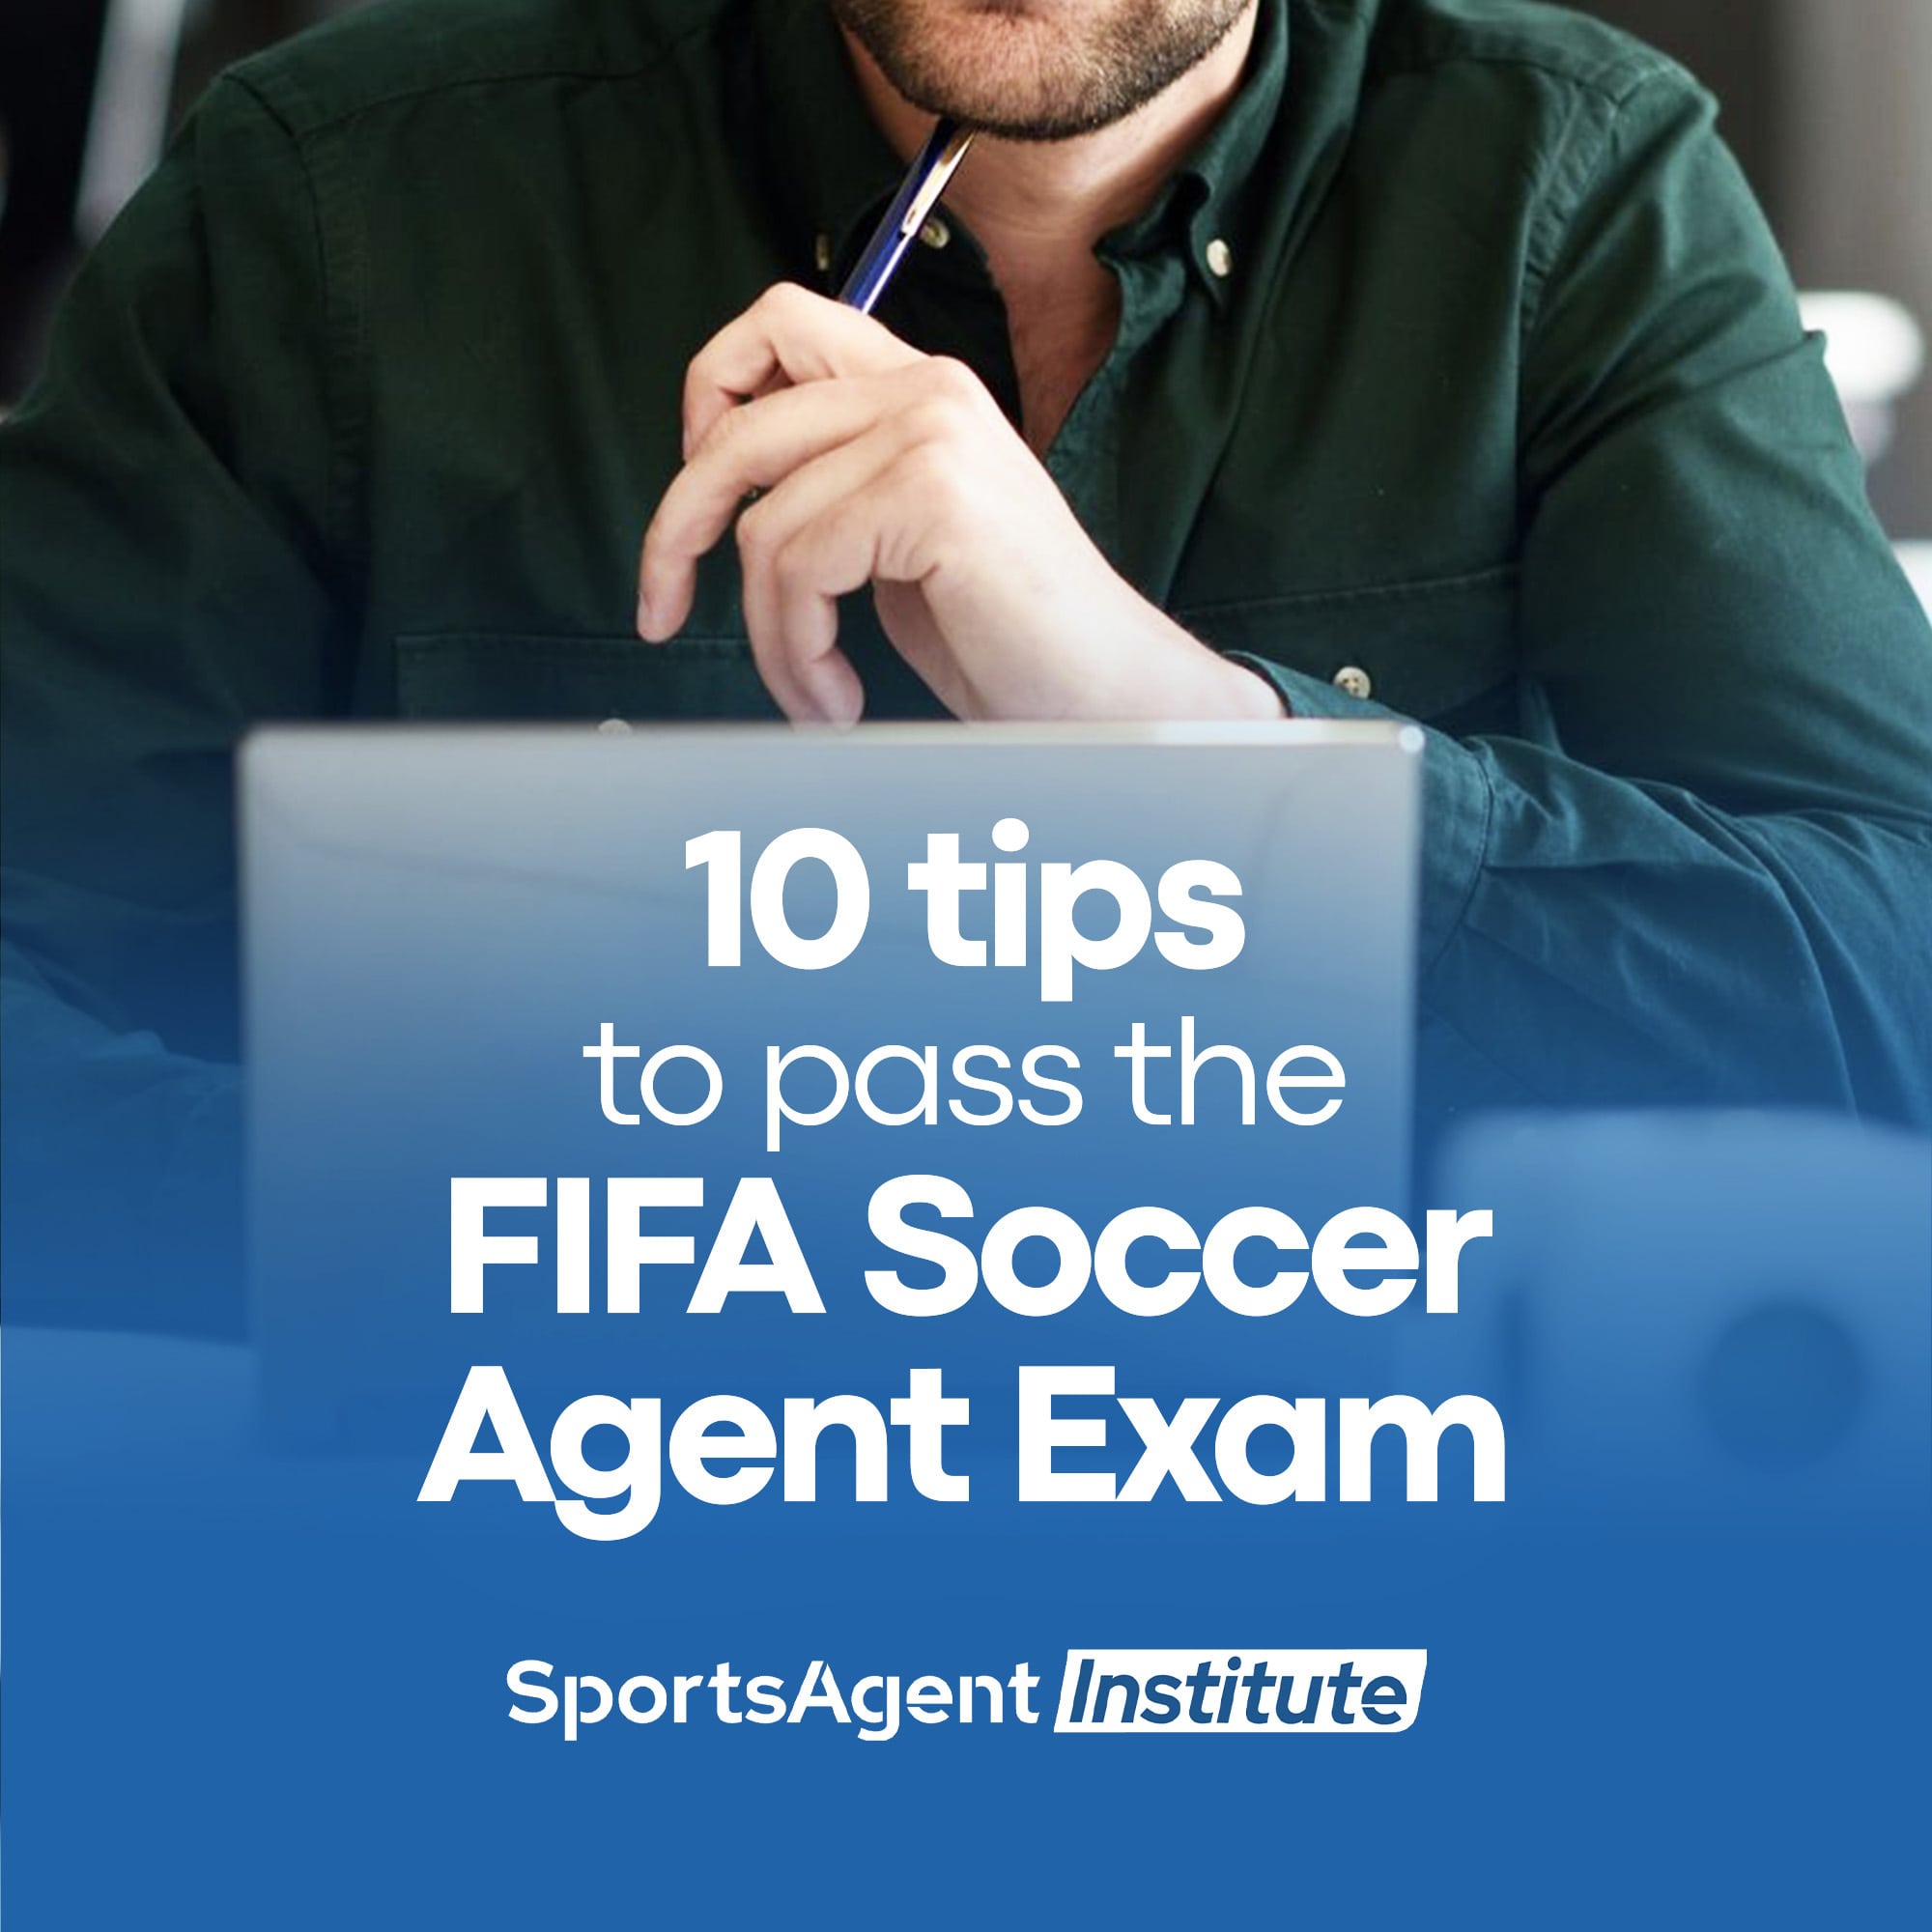 10-tips-to-pass-the-fifa-soccer-agent-exam